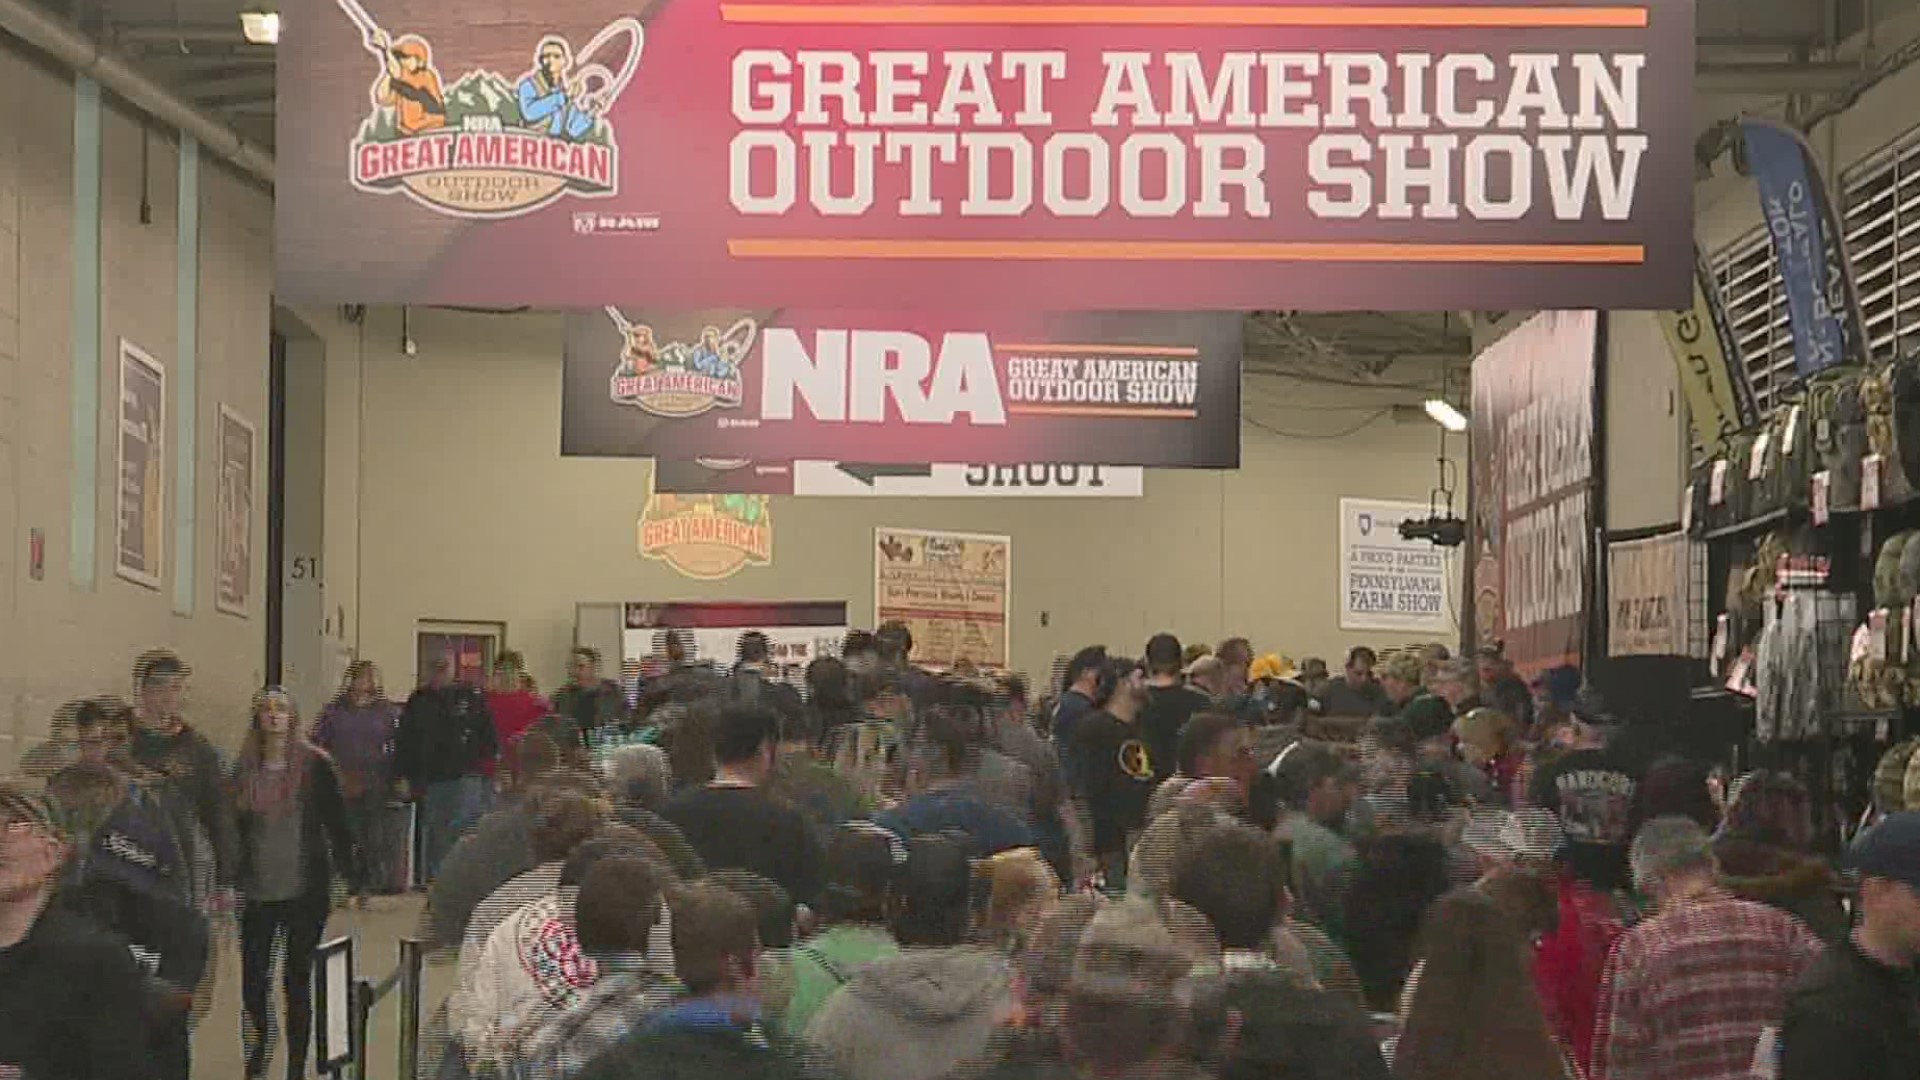 The Great American Outdoor Show in Harrisburg is up and running at the Farm Show Complex.